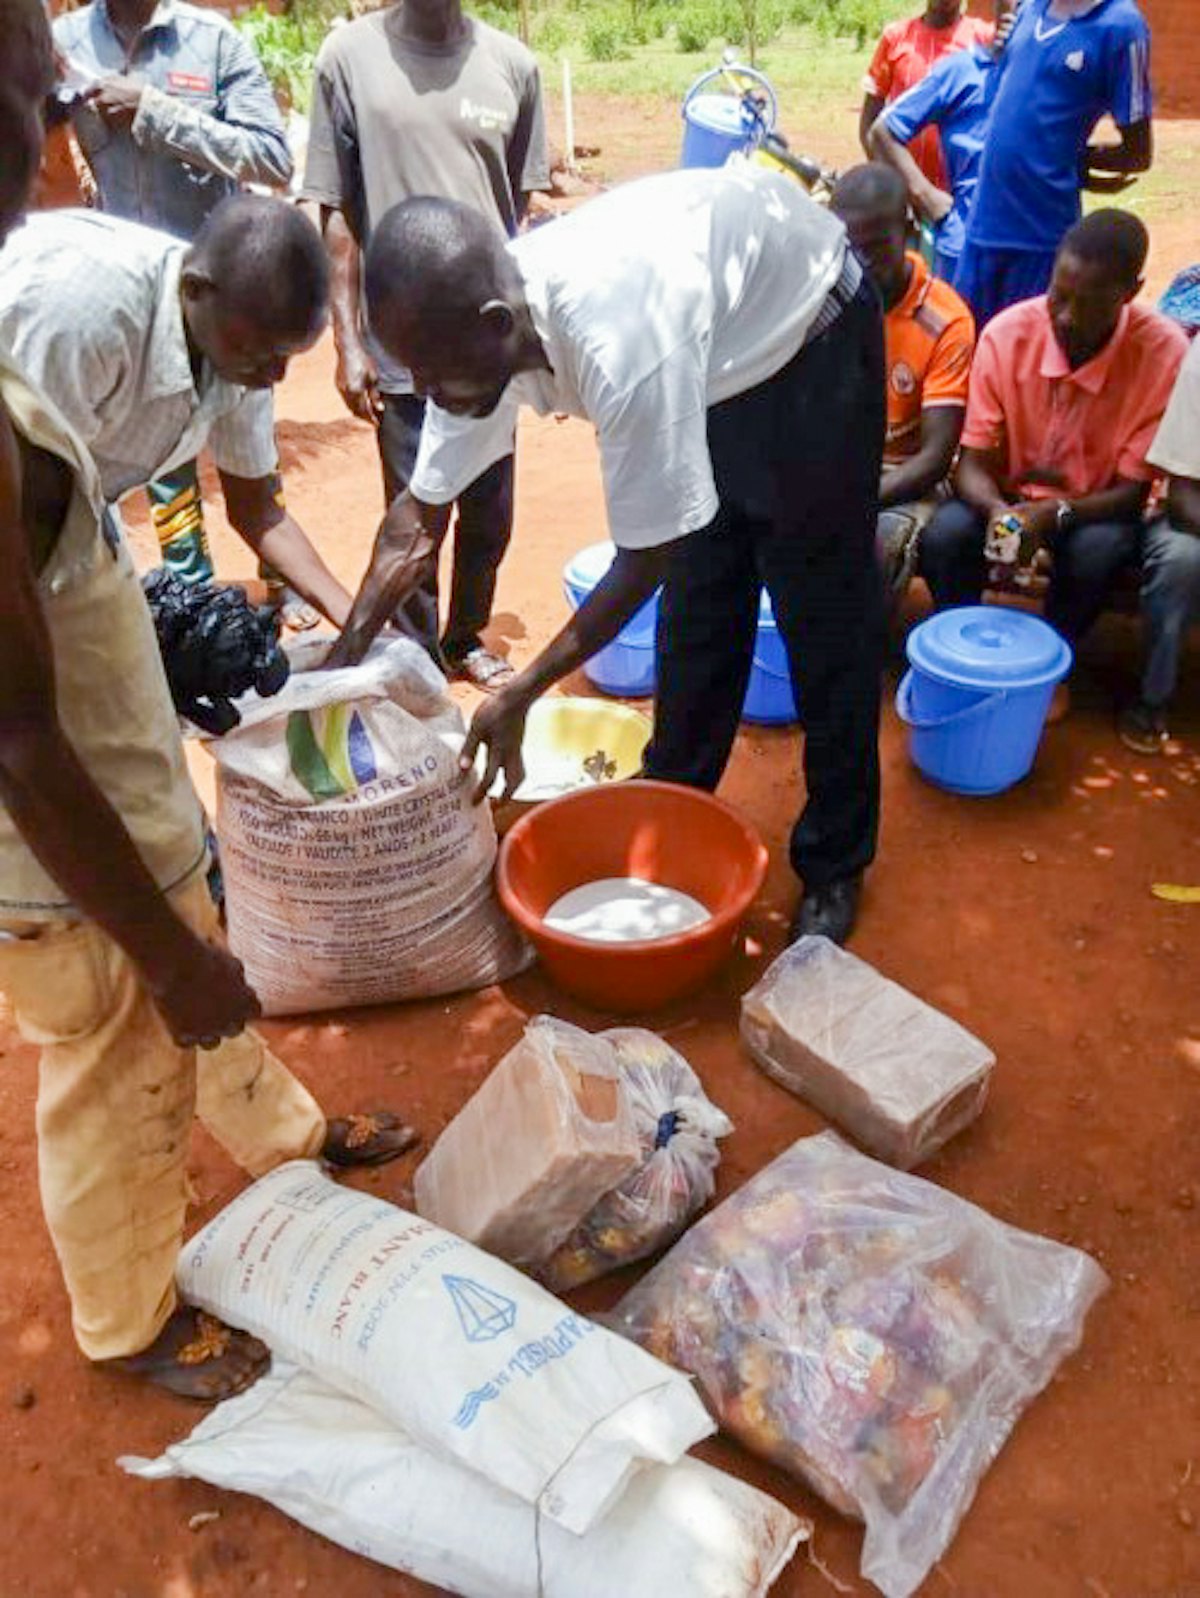 Relief efforts carried out according to safety measures required by the government. In an effort coordinated by the emergency committee established by the National Spiritual Assembly, essential supplies are distributed in a community affected by conflict.